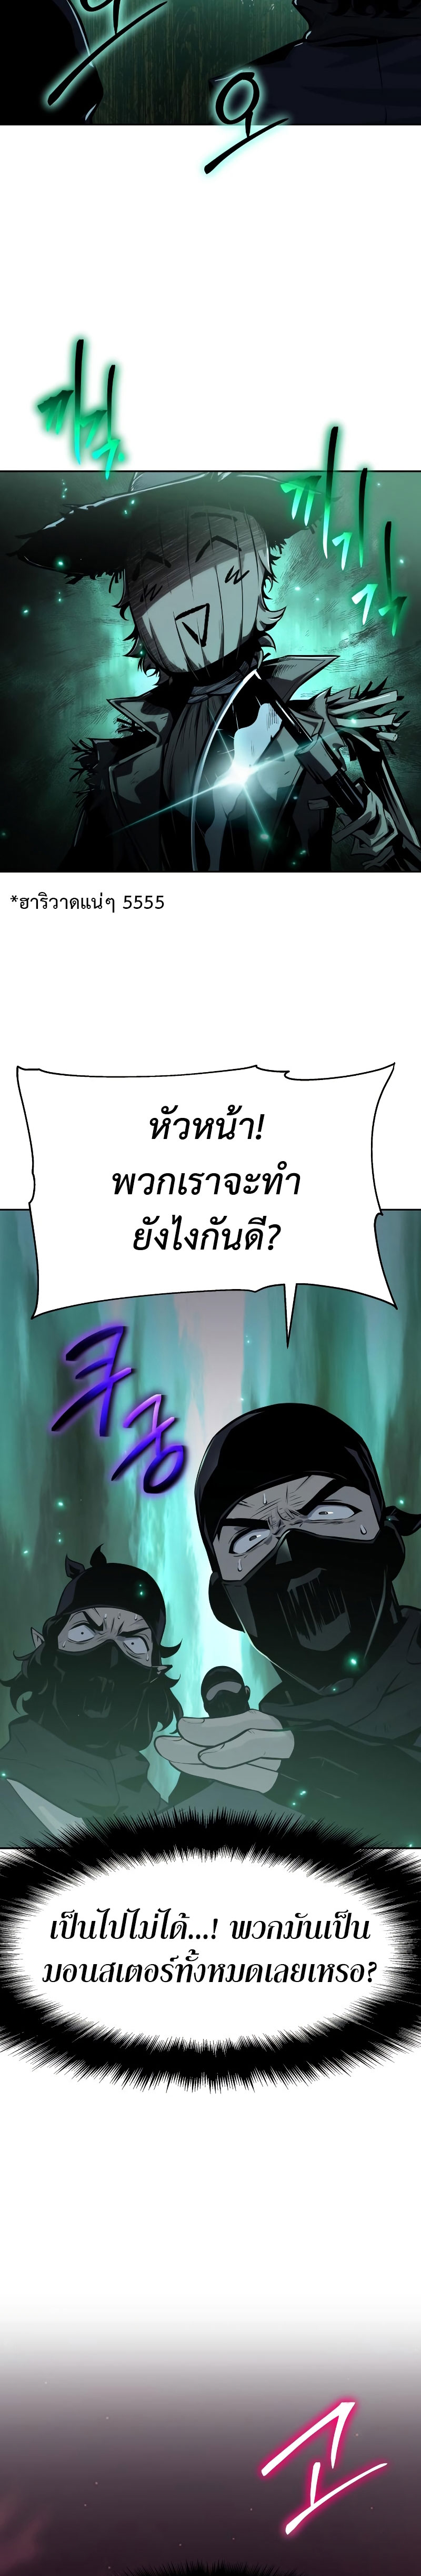 The Knight King 18 (24)